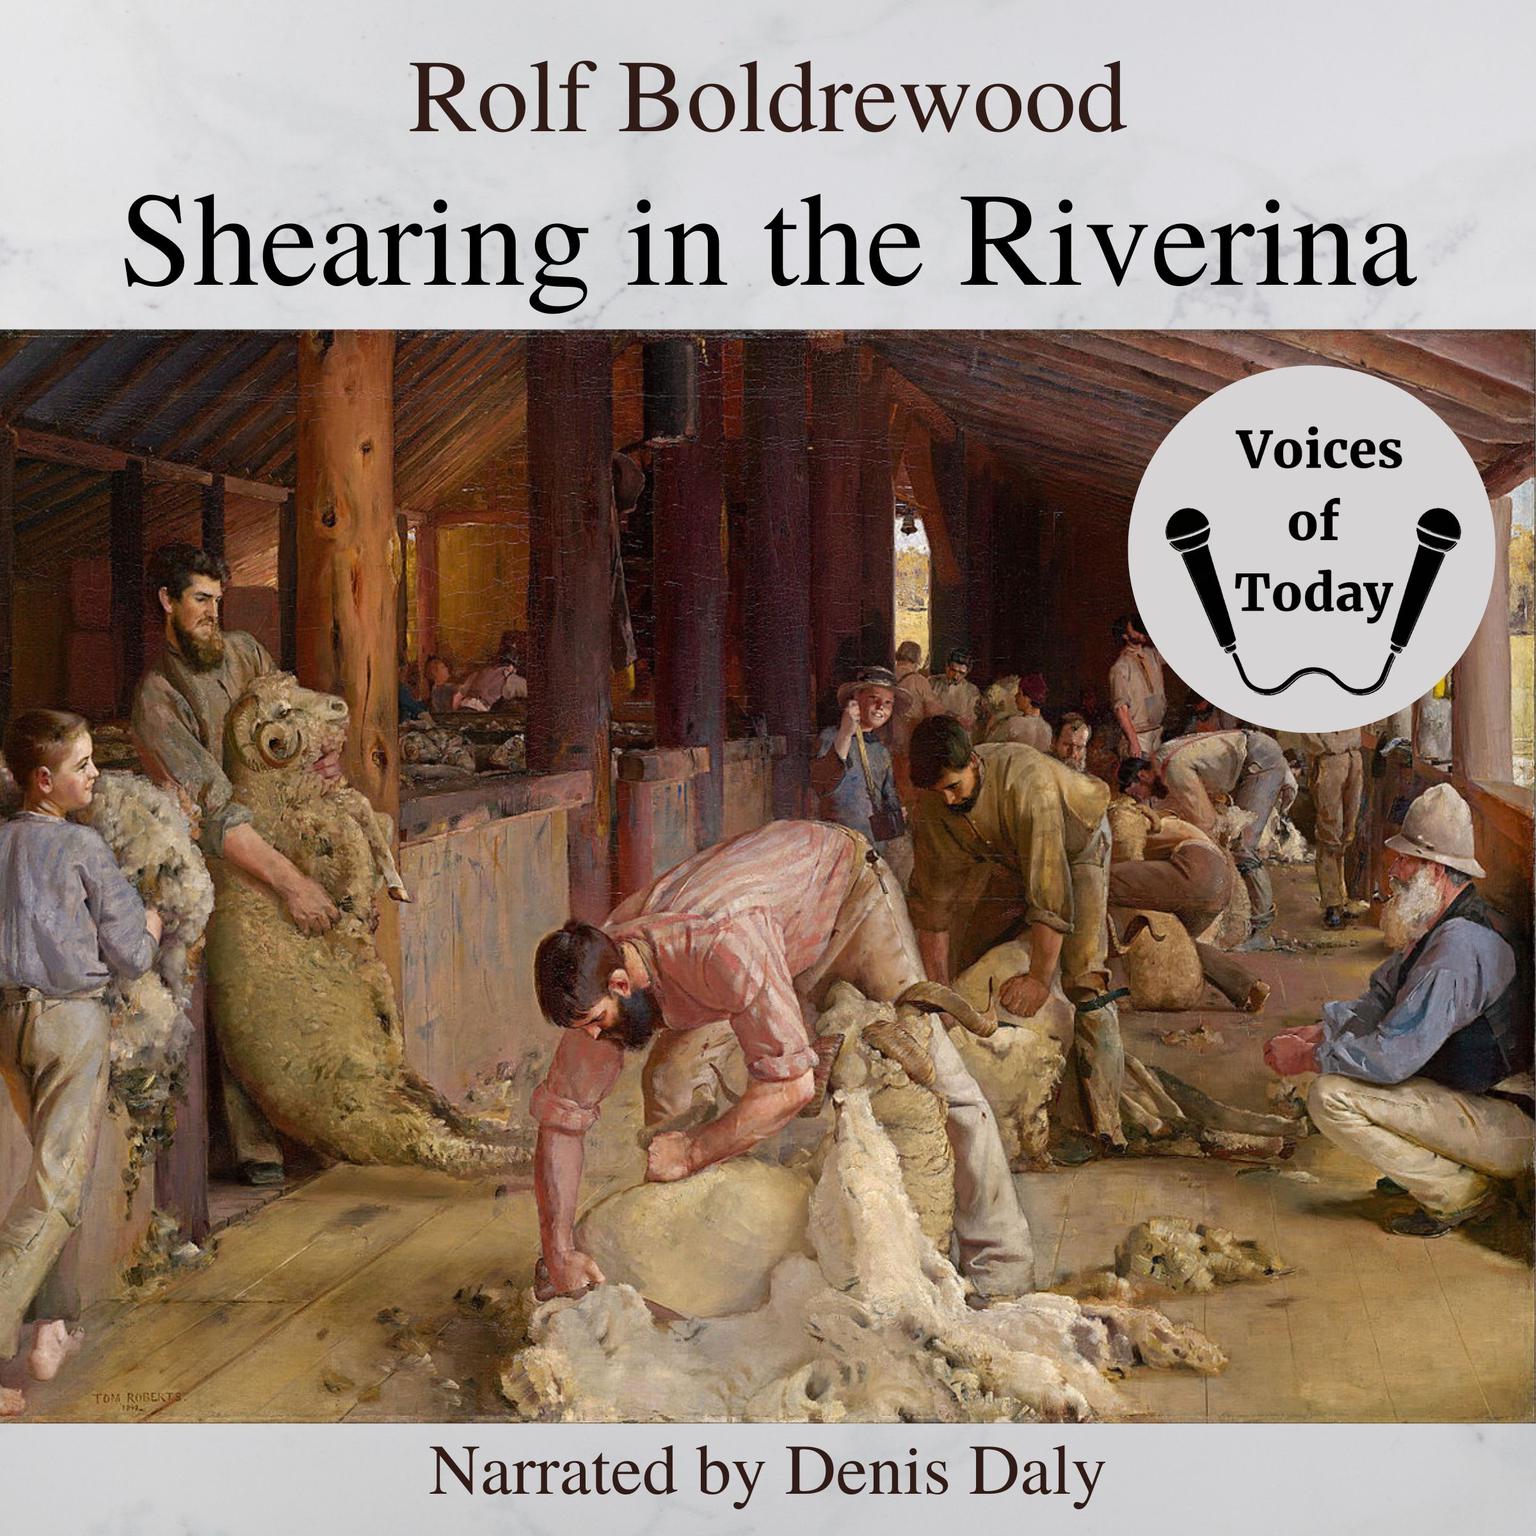 Shearing in the Riverina, New South Wales Audiobook, by Rolf Boldrewood